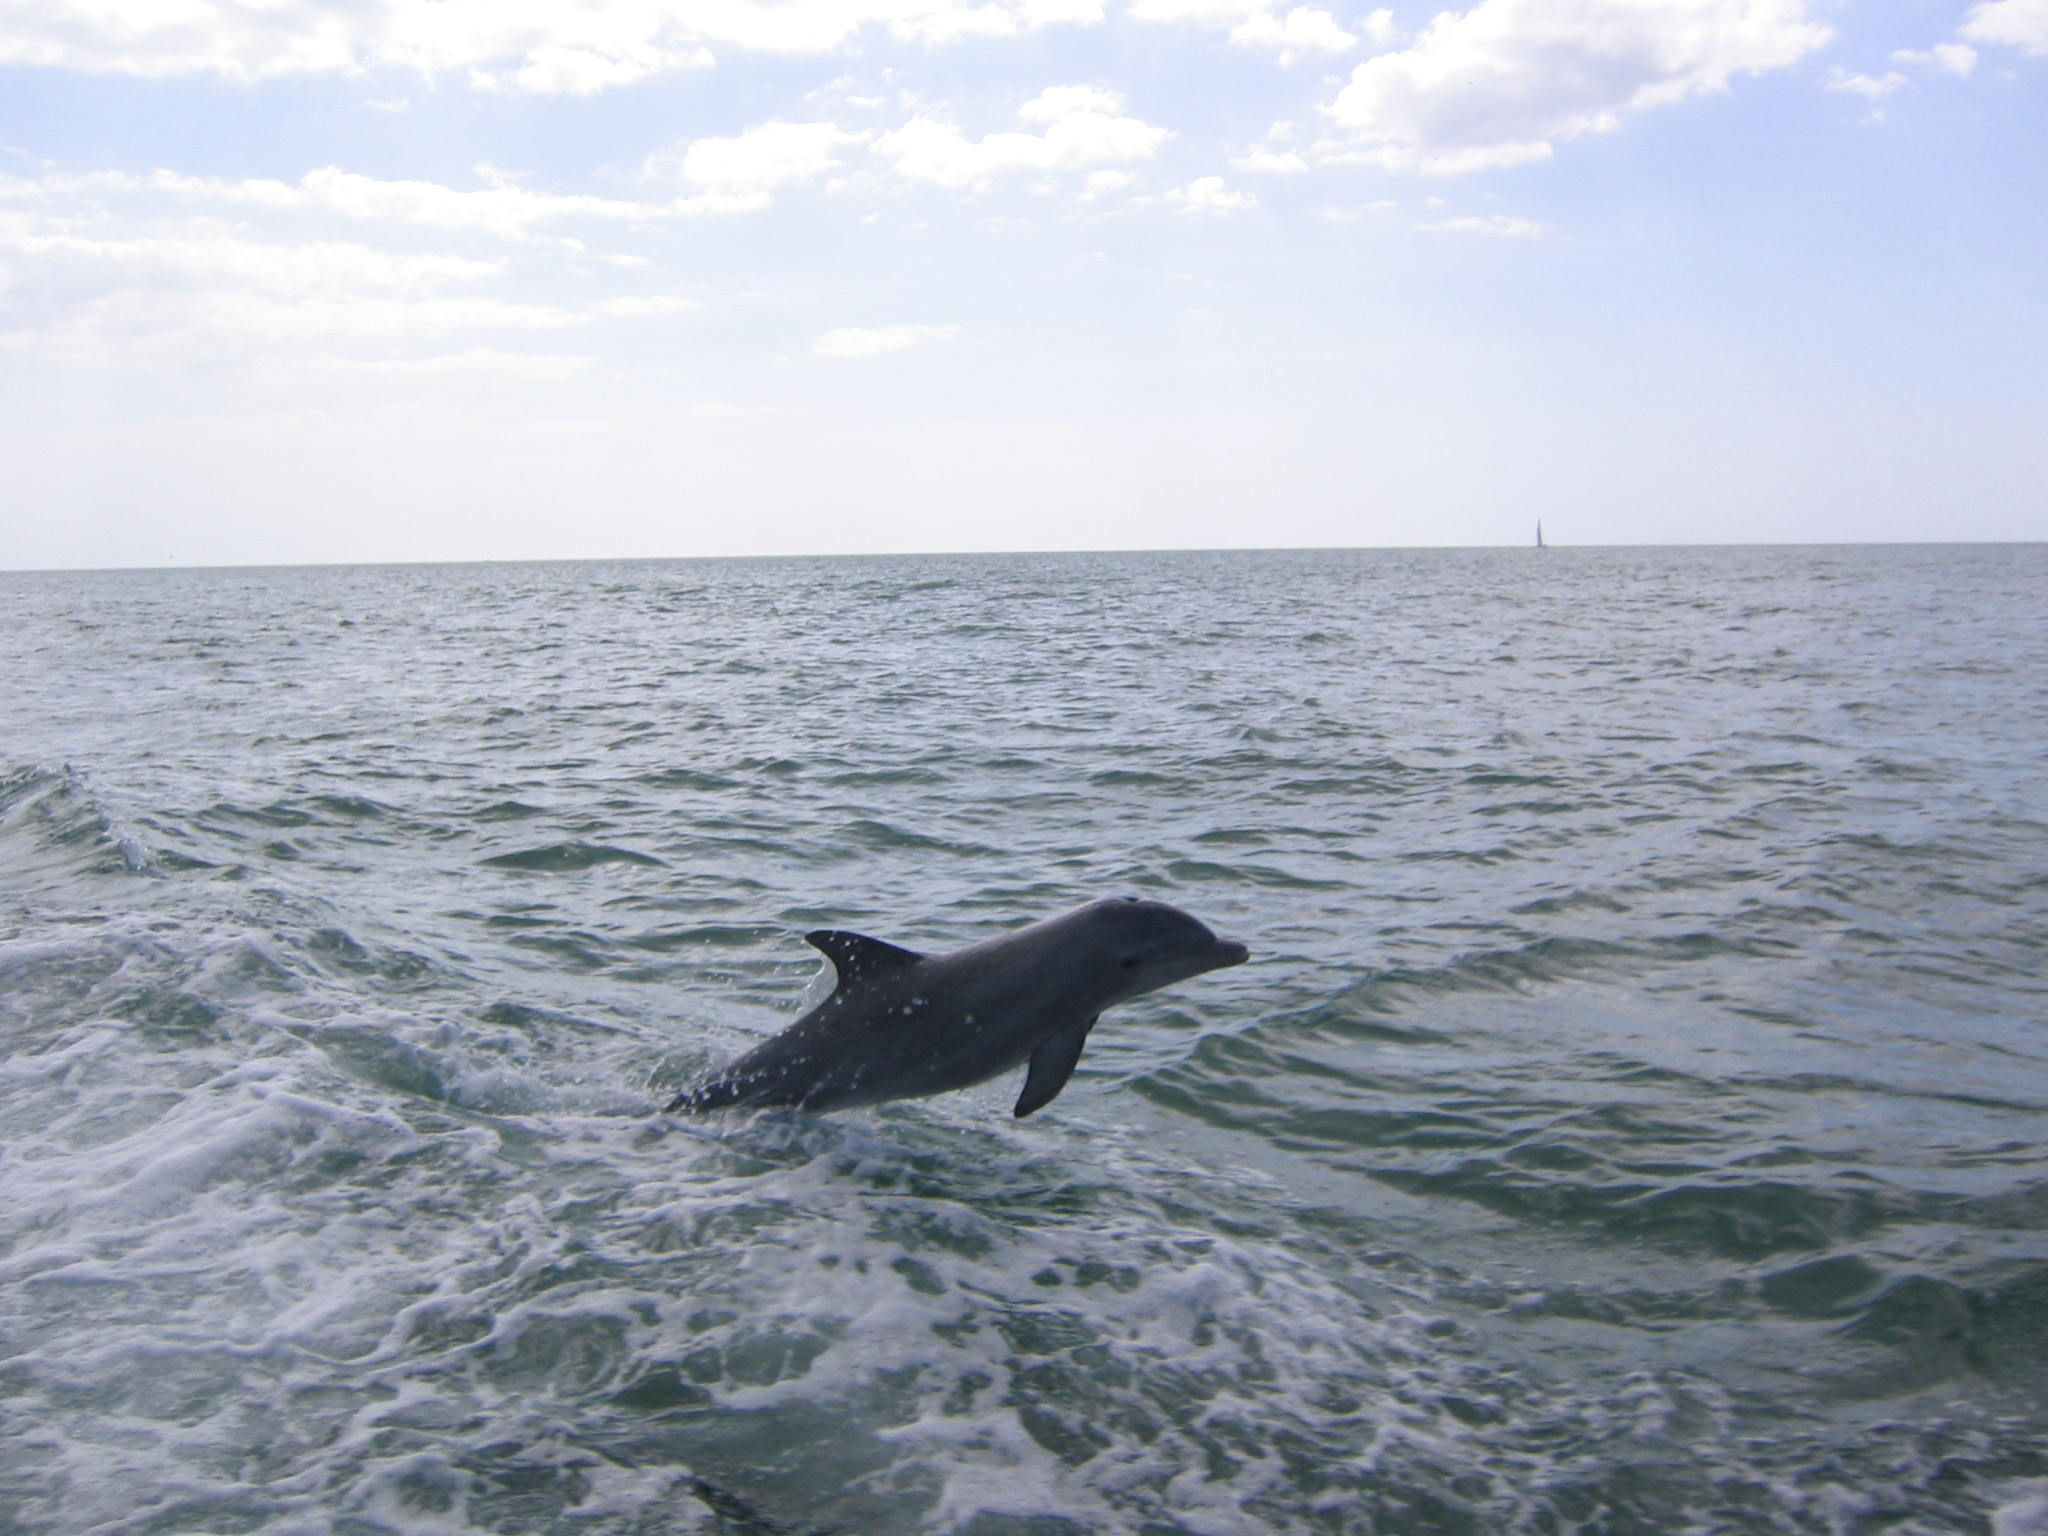 Dolphins playing just outside beach!